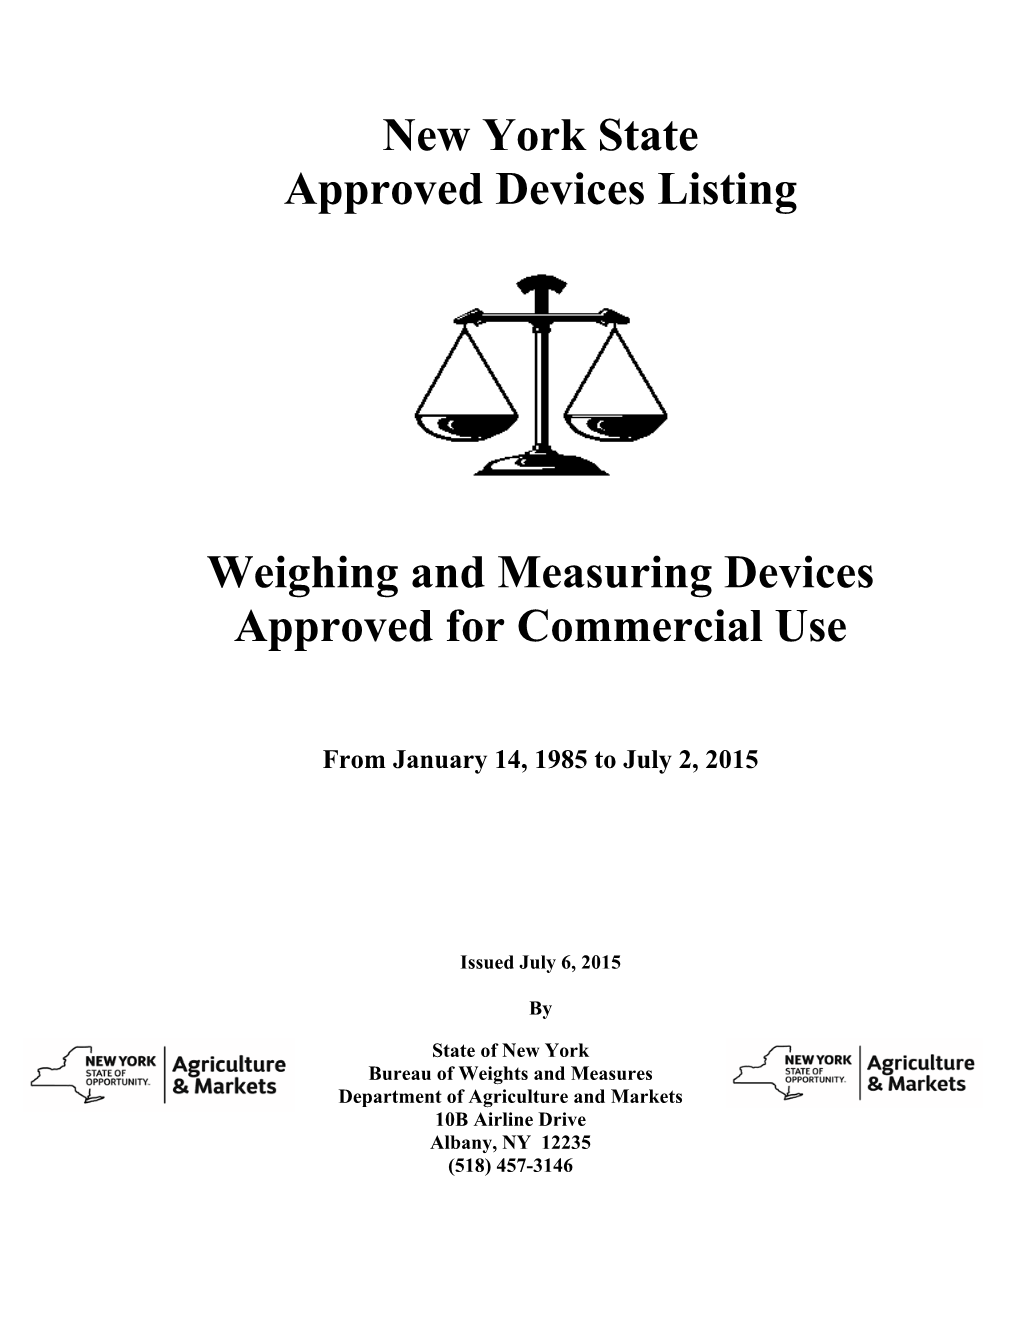 Weighing and Measuring Devices Approved for Commercial Use